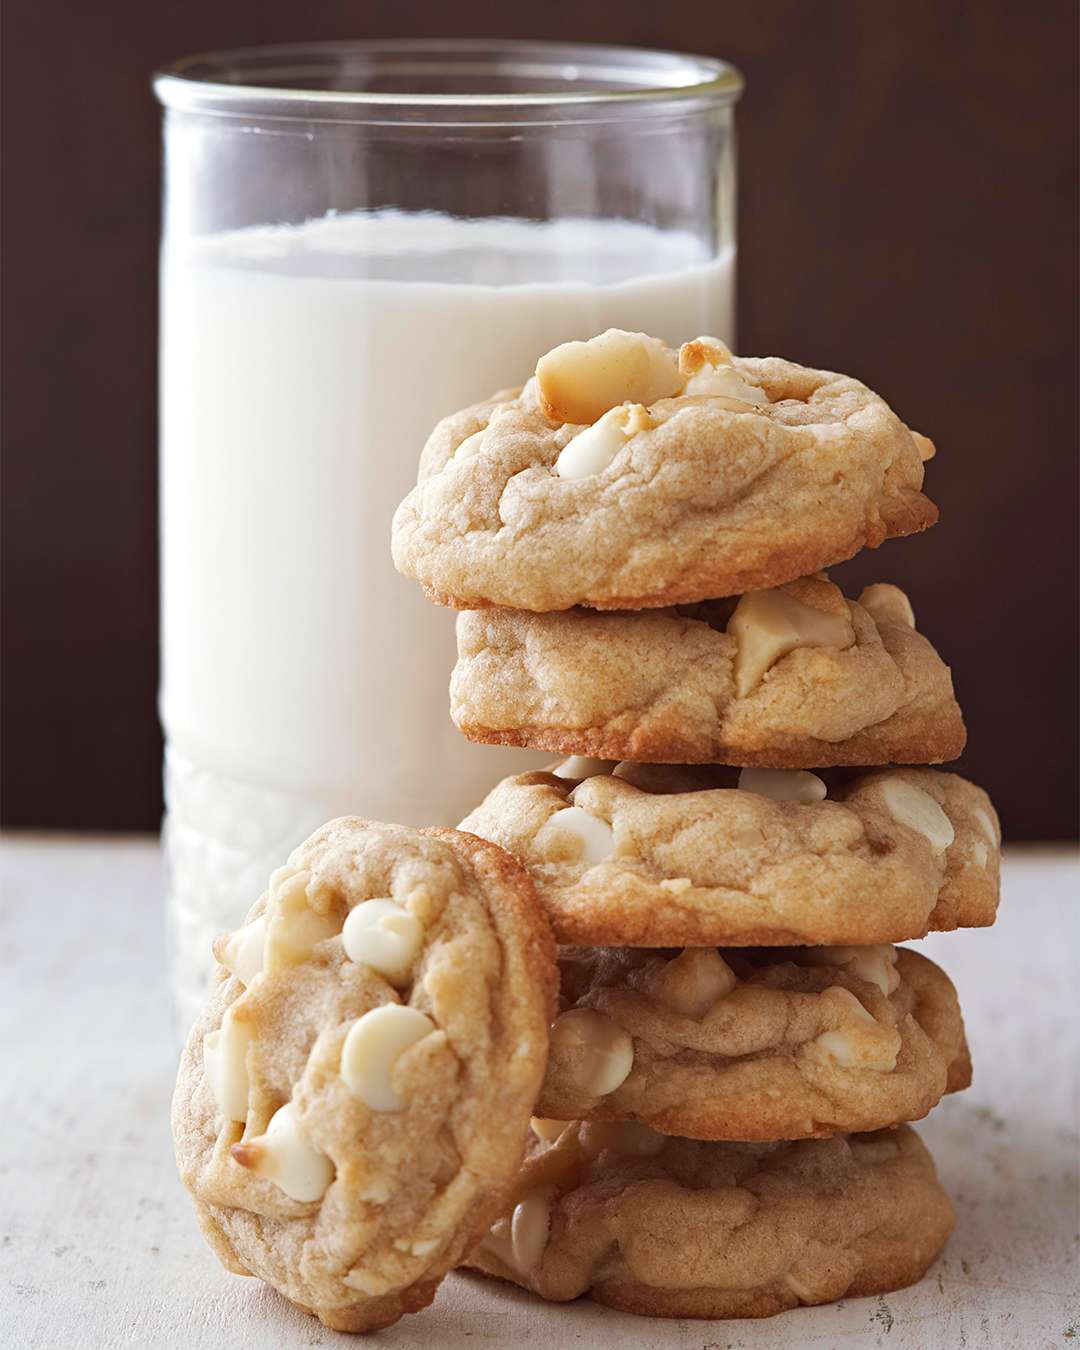 Macadamia Nut and White Chocolate Chip Cookies with a glass of milk